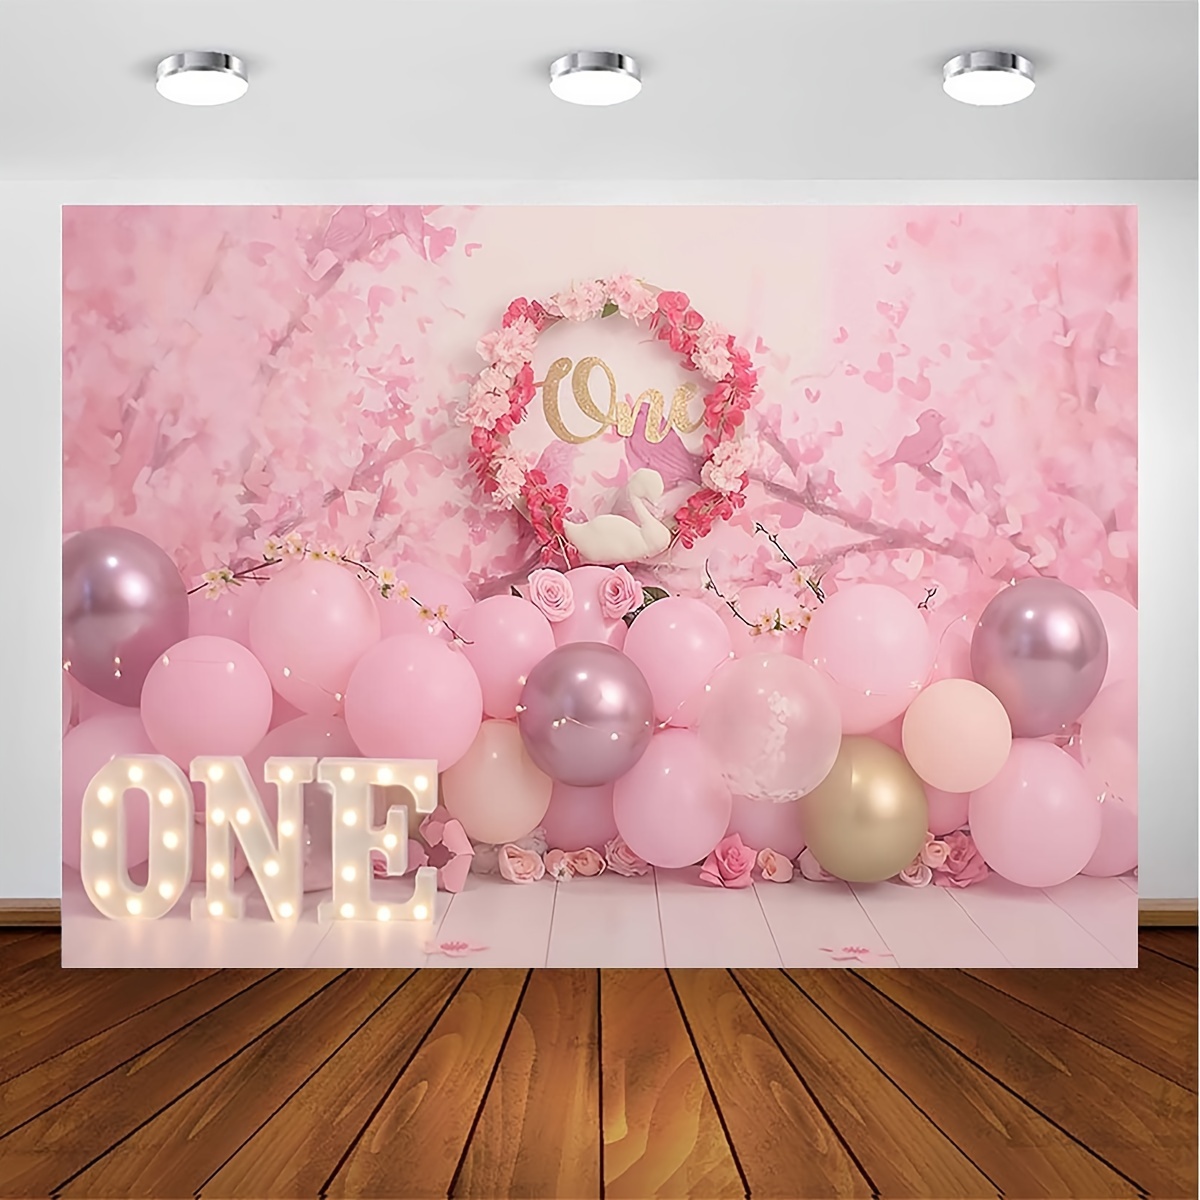 One Sign First Birthday Photo Prop Wooden Sign for Cake Smash One